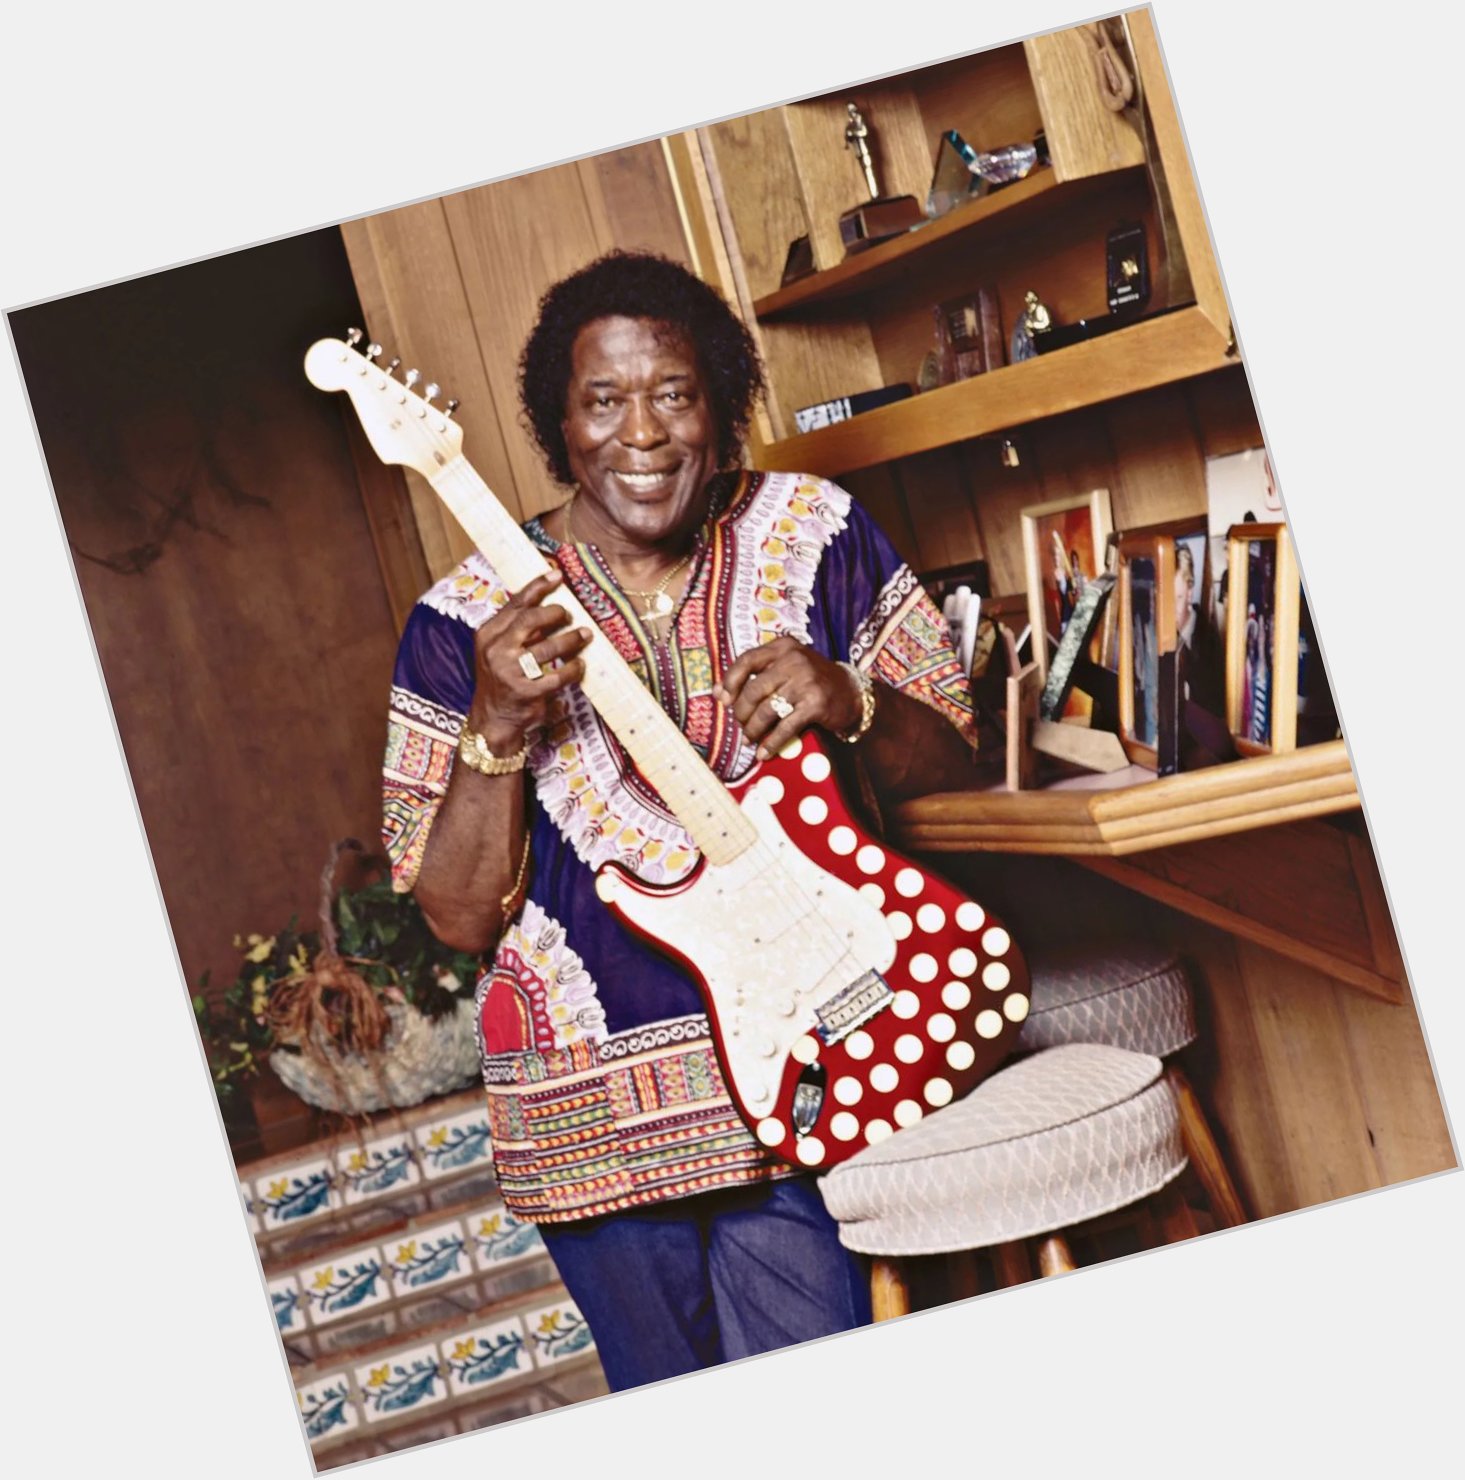 We lost two icons today, but Buddy Guy is still here and he turned 86 today. Happy birthday to a true legend. 